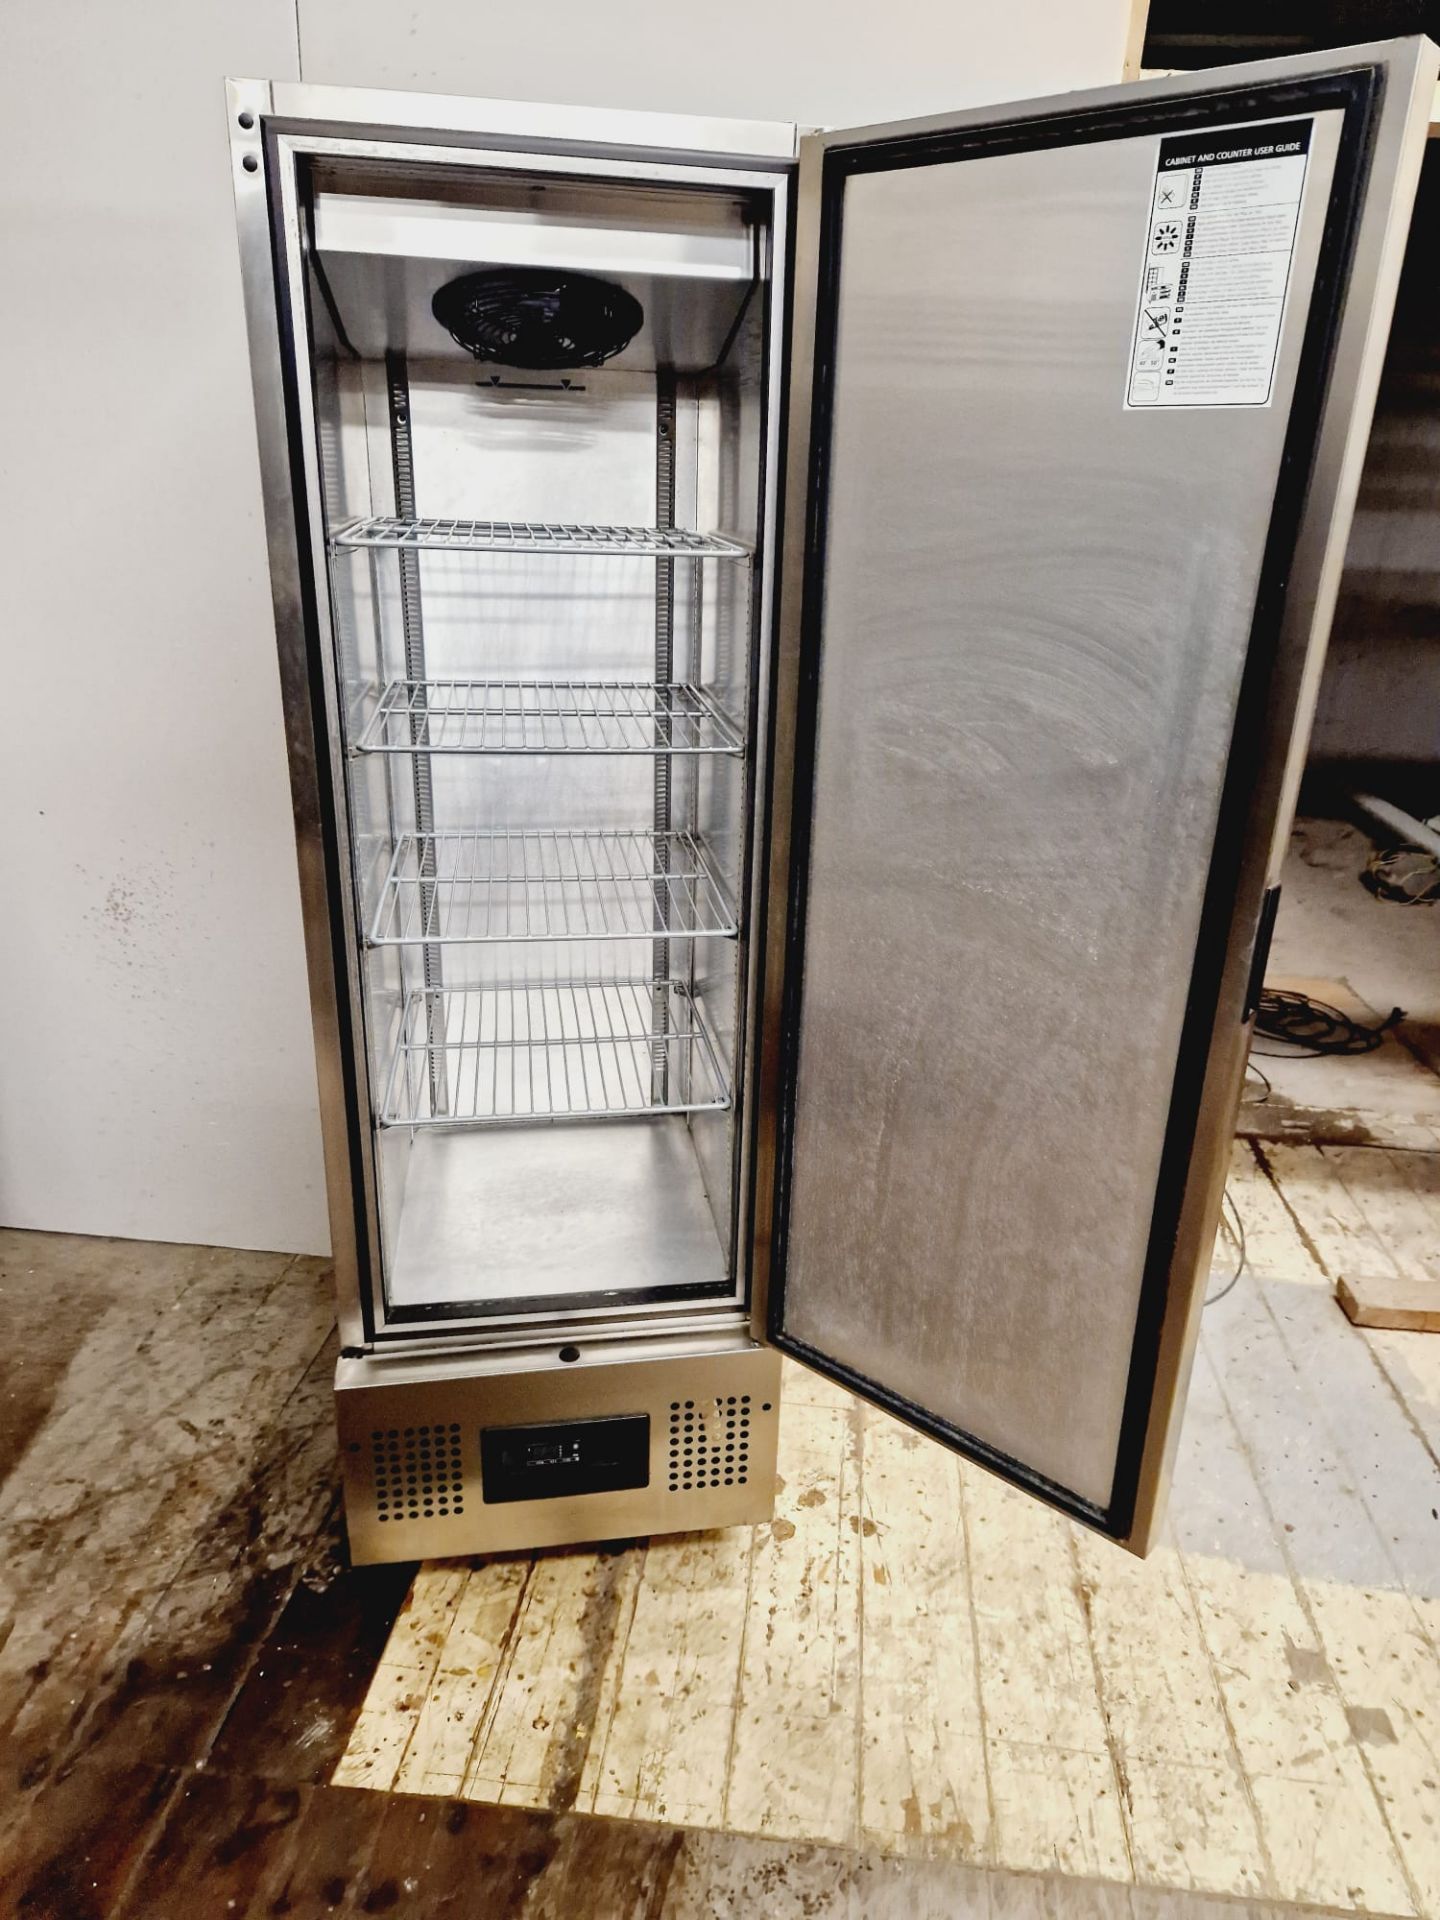 FOSTER SLIM LINE FREEZER - EP700 HSTB -18 TO -22 - FULLY SERVICED AND WORKING